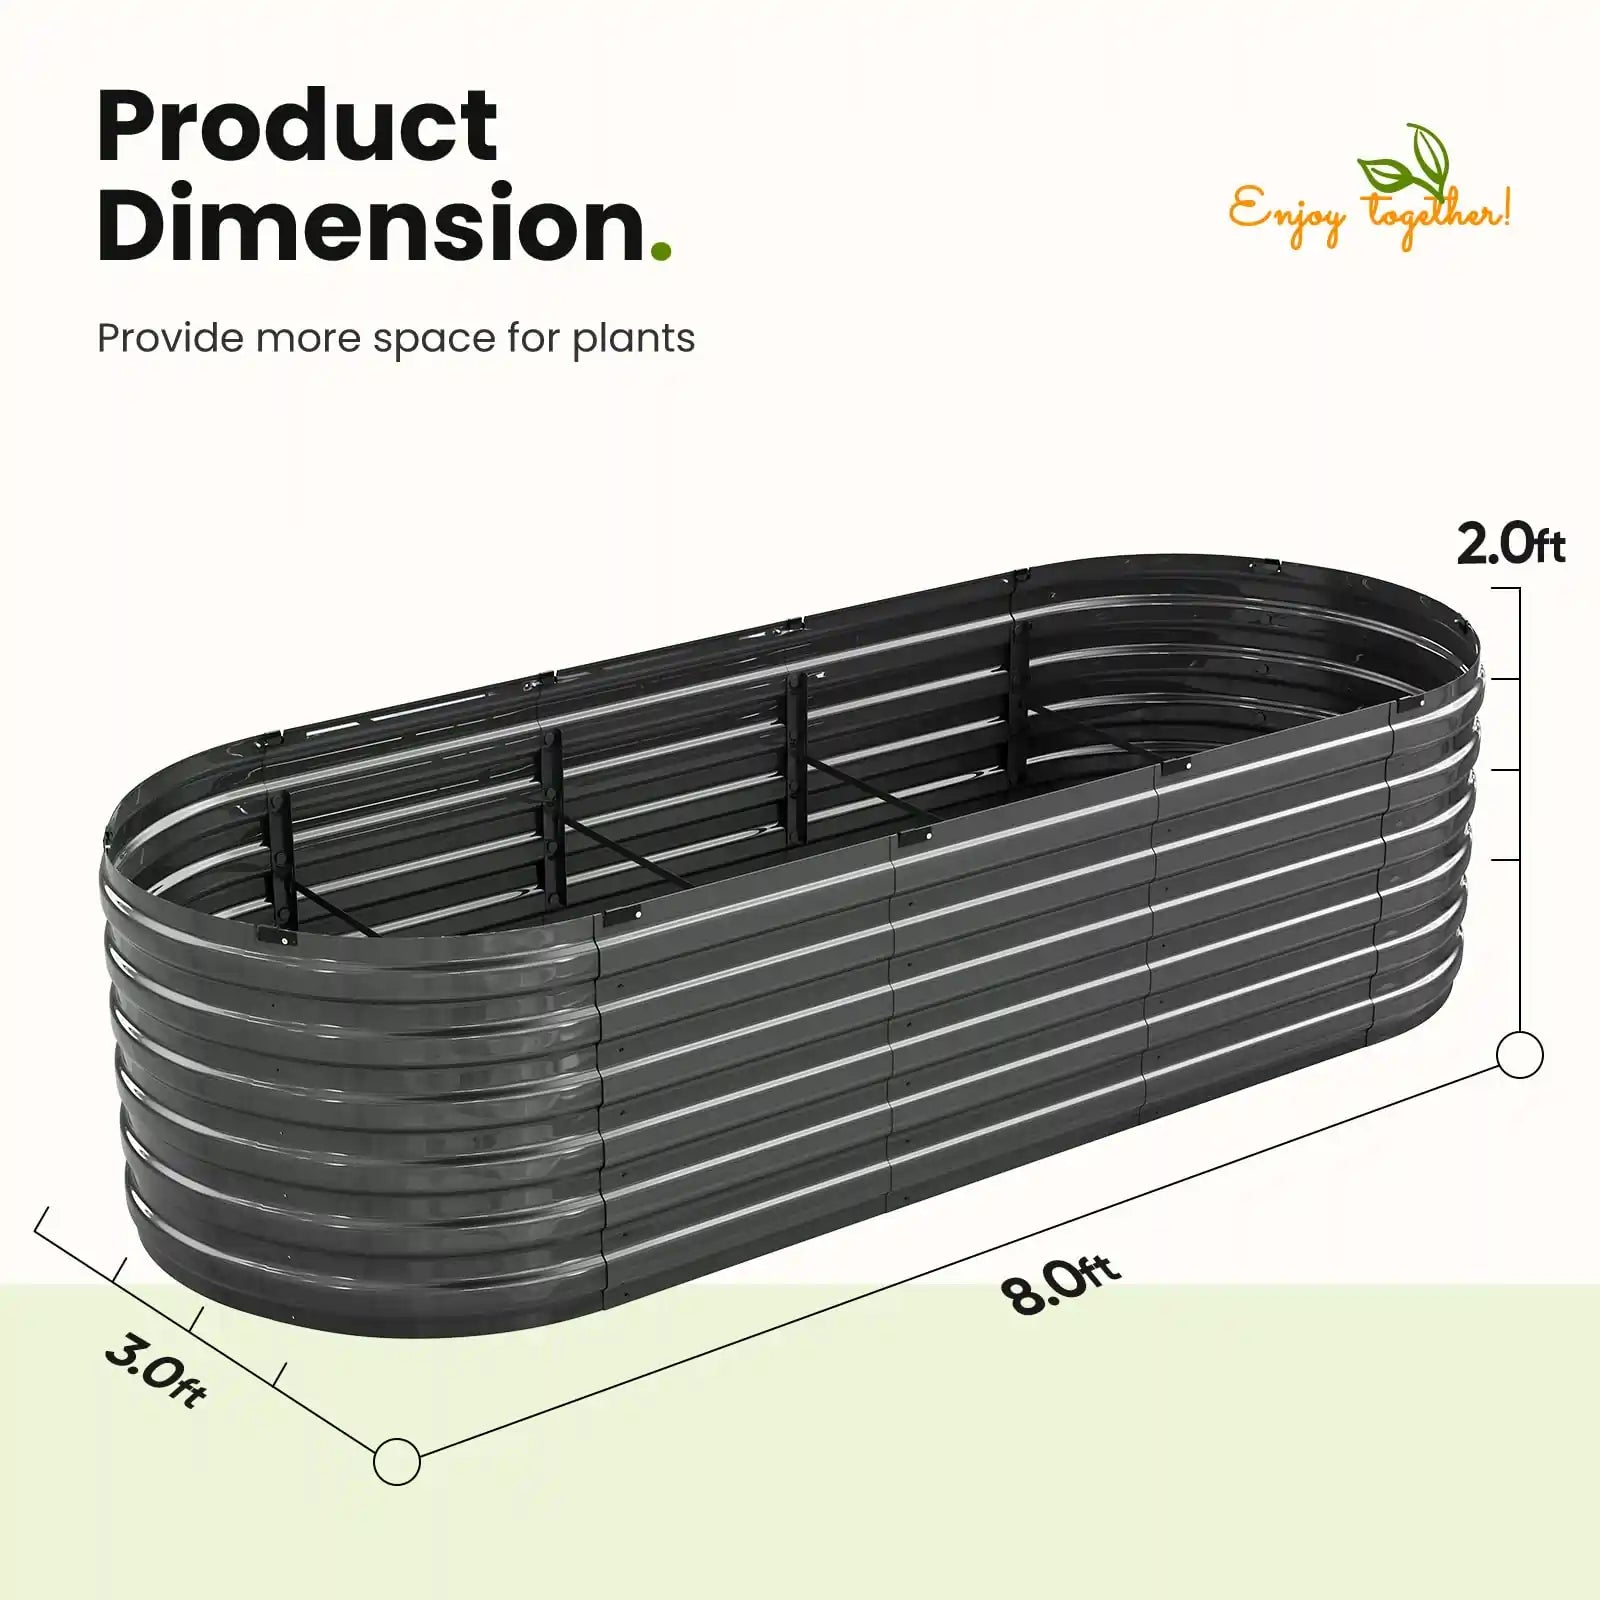 KING BIRD Screwless Raised Garden Bed 8x3x2ft product dimension#size_8x3x2ft